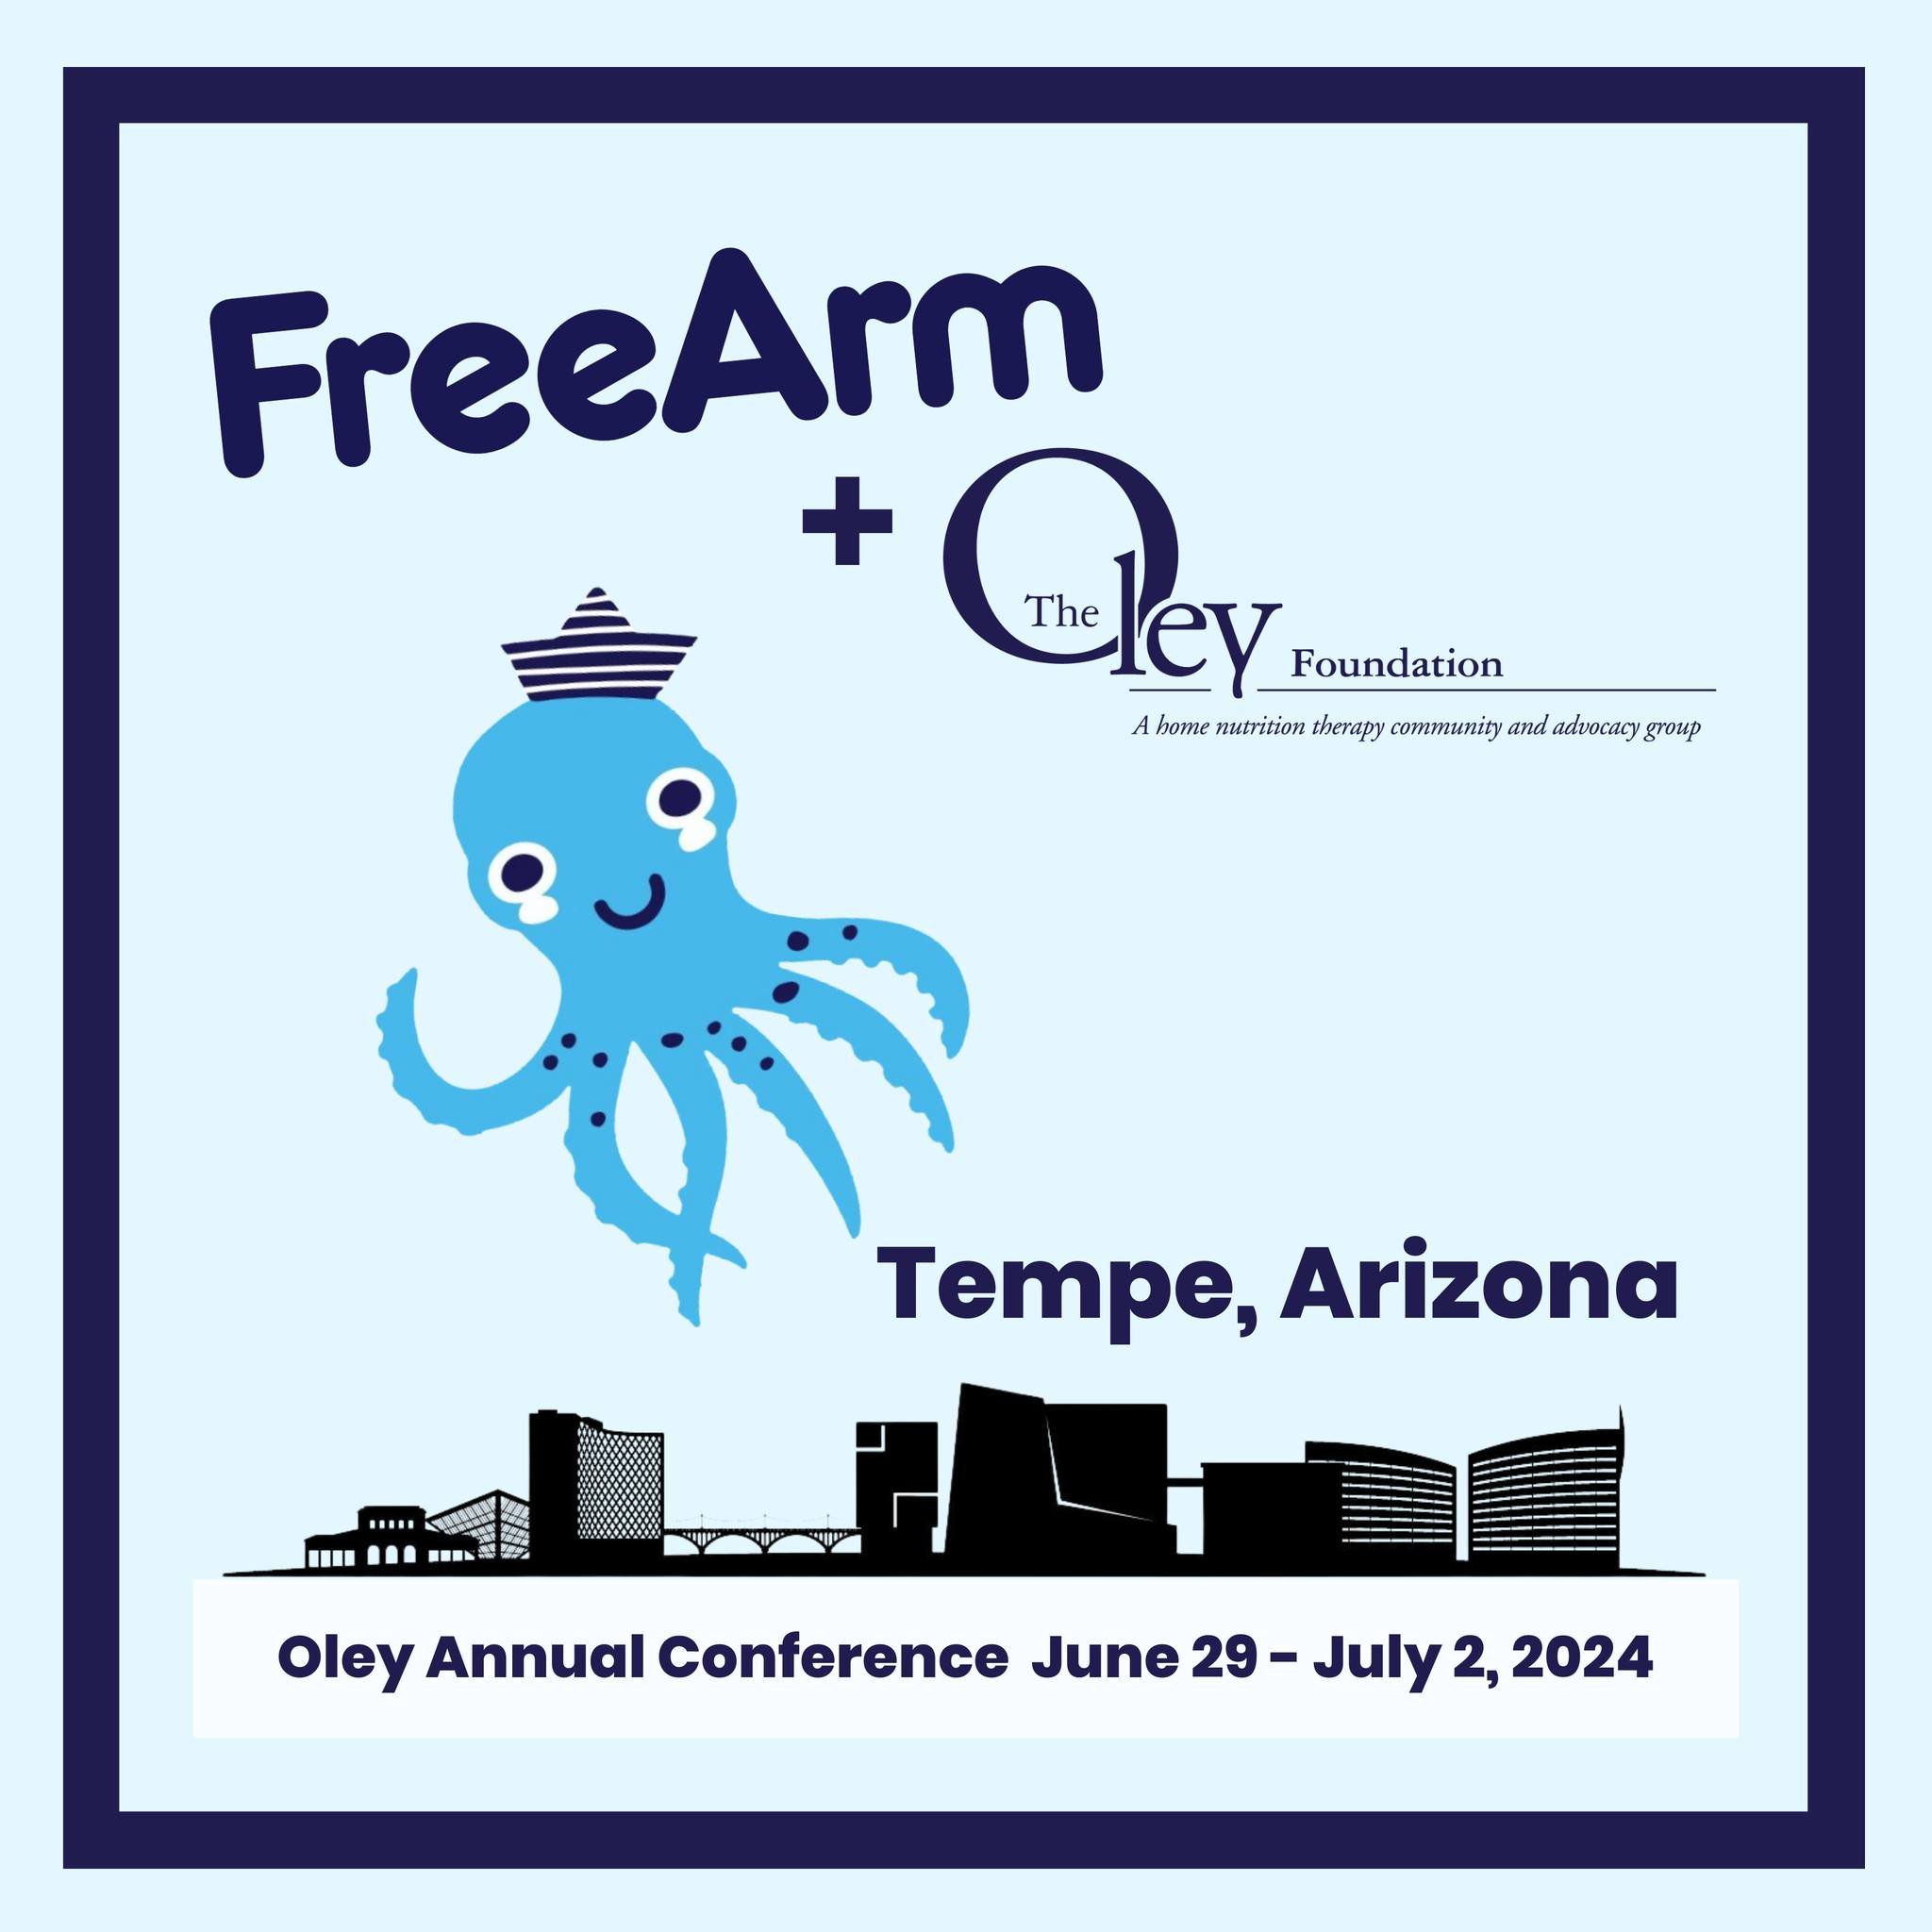 Will you be attending @the_oley_foundation annual conference in Tempe? Let us know and we will be sure to look for you!

Haven't registered yet? You can go to the link in our bio to register today!

#oleyconference #oley24 #oleyfoundation #feedingpum